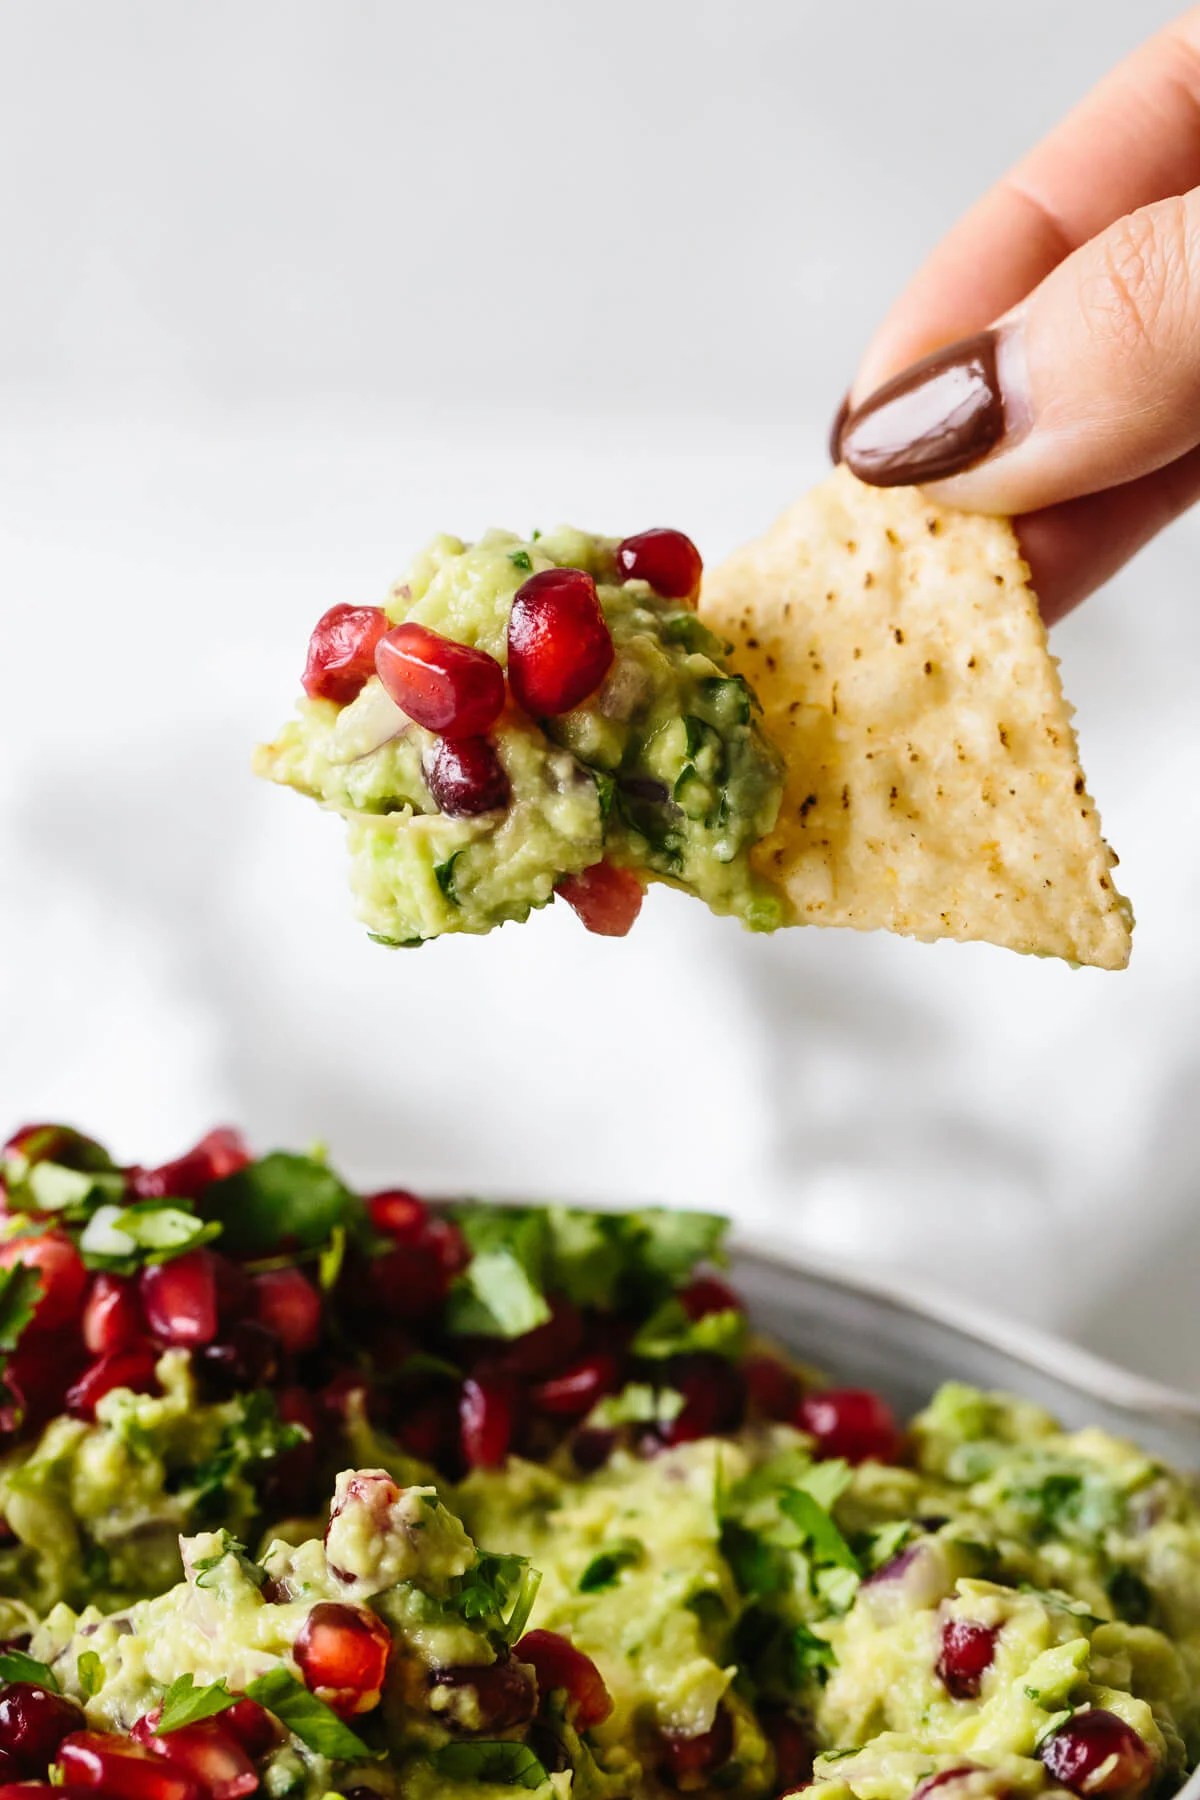 Scooping up pomegranate guacamole with a tortilla chip.